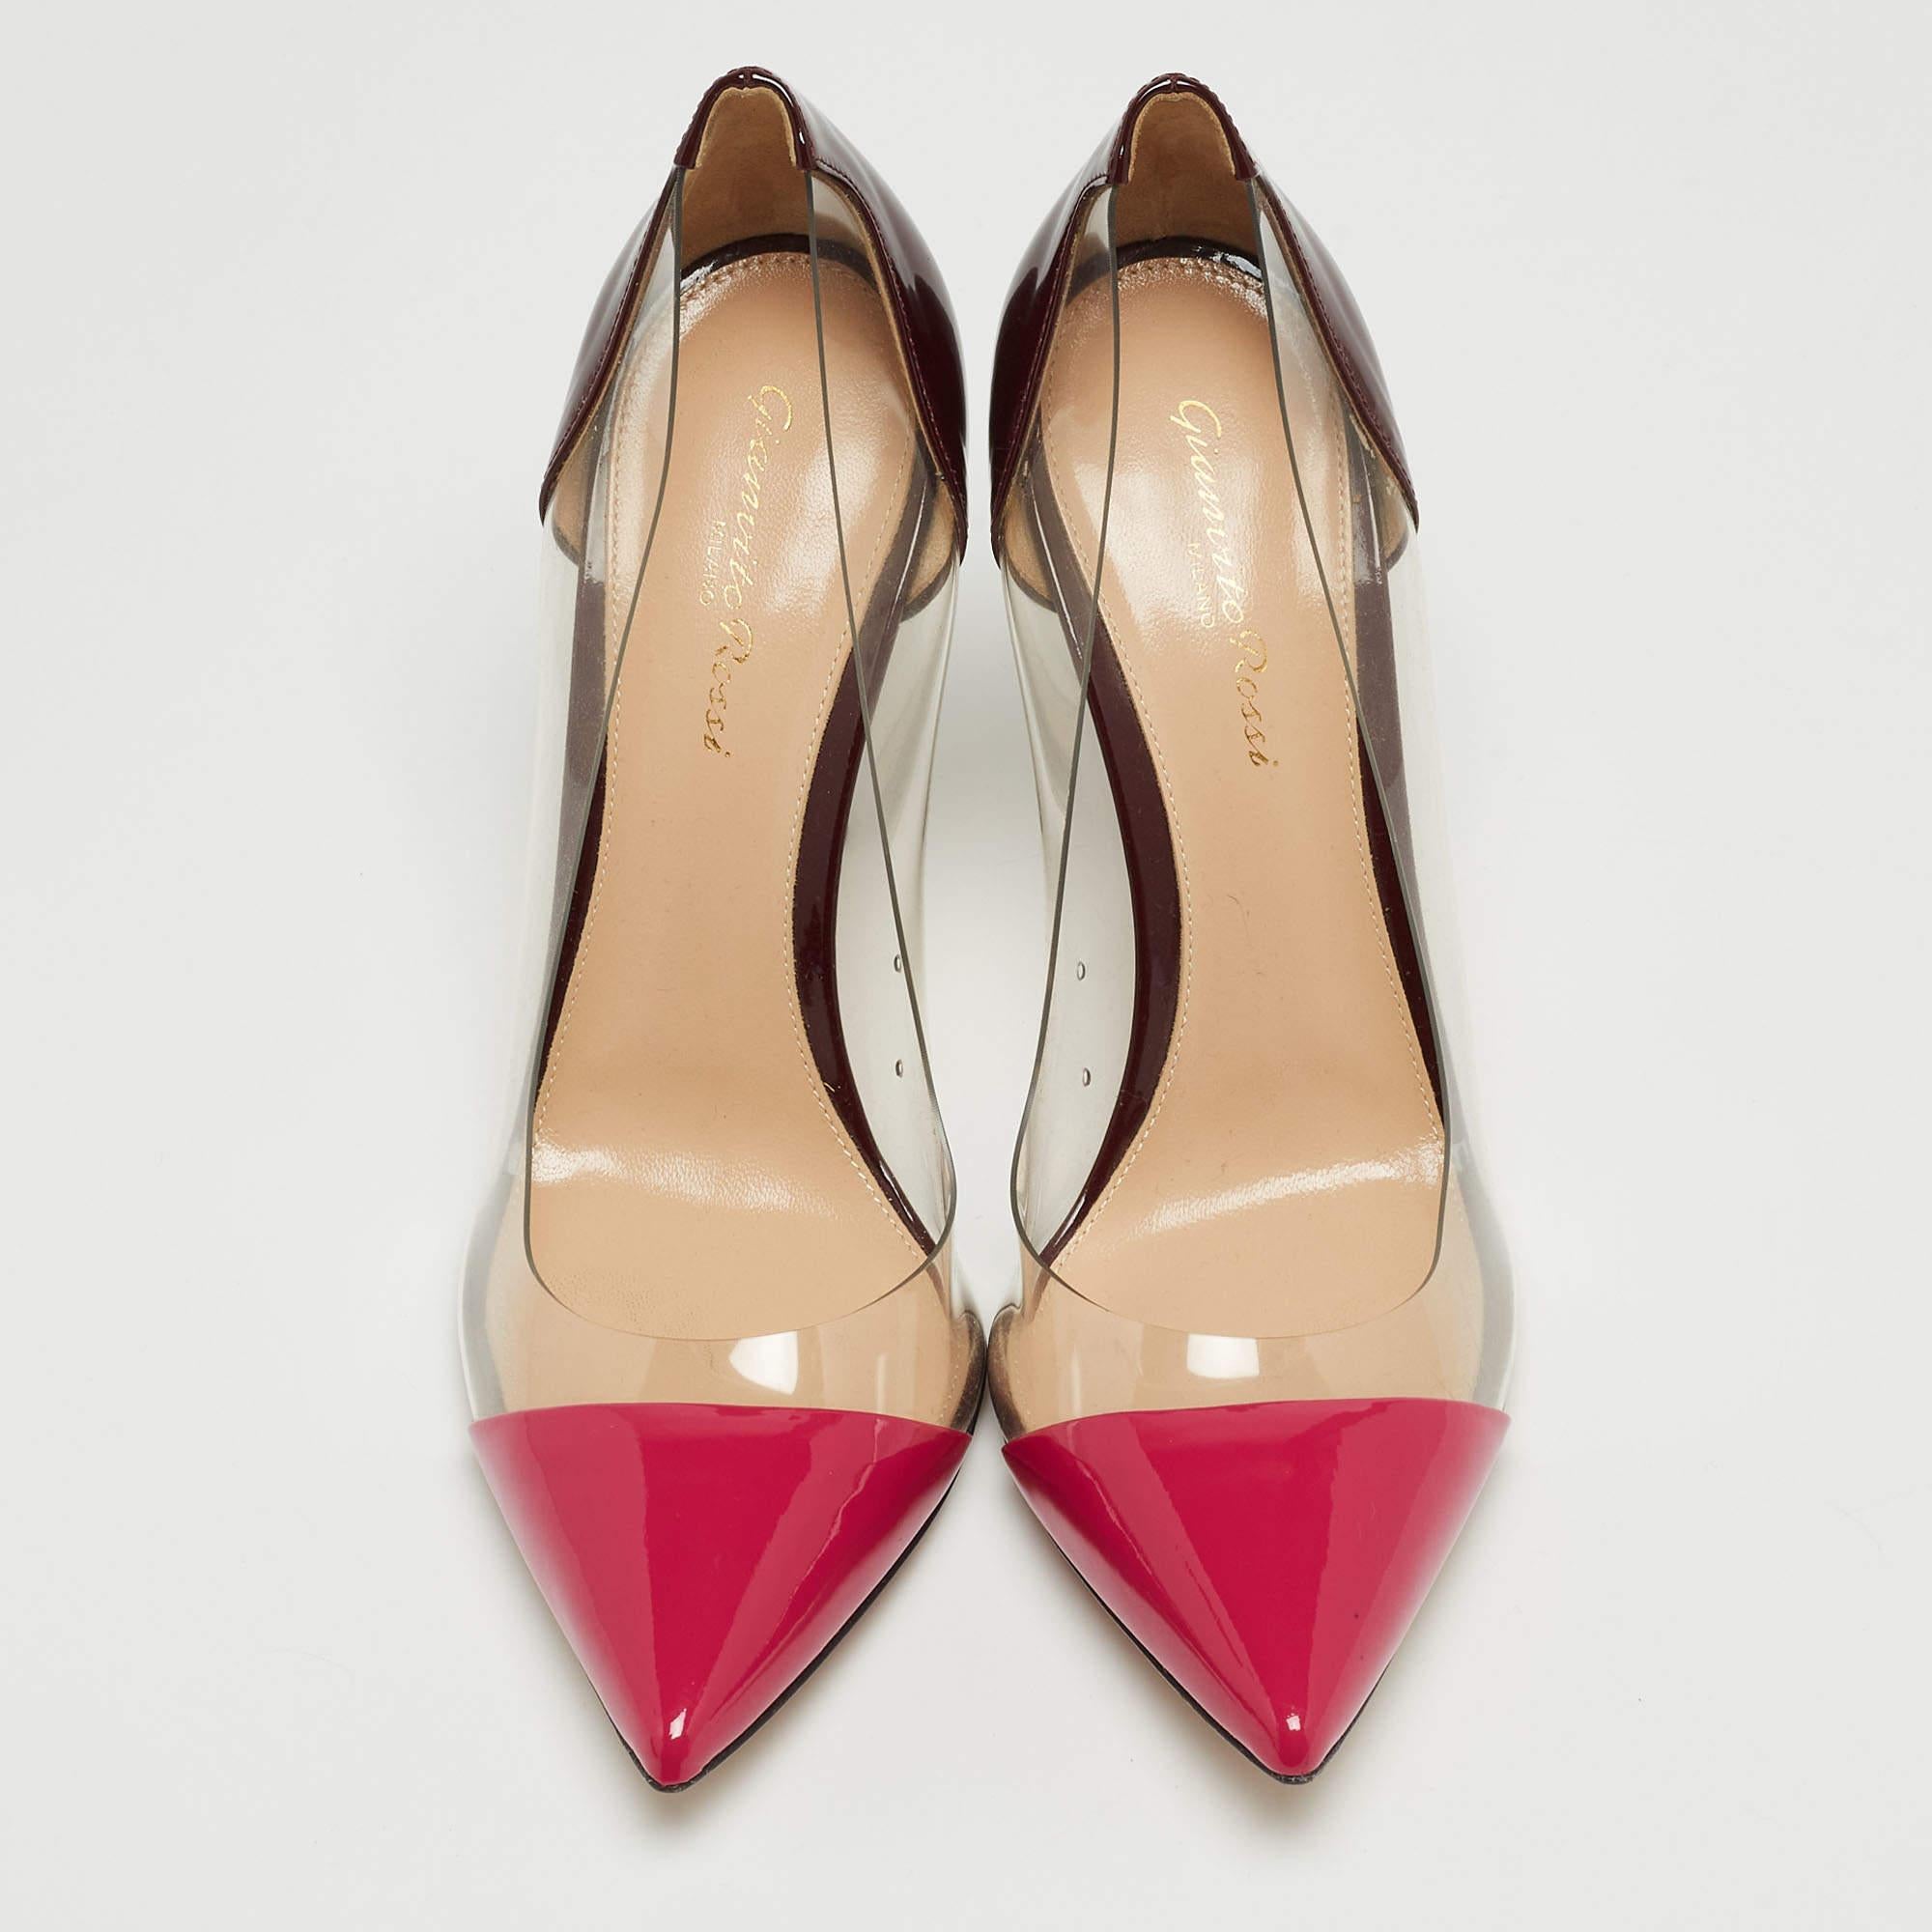 Gianvito Rossi Pink/Burgundy Patent Leather and PVC Plexi Pumps Size 38.5 3